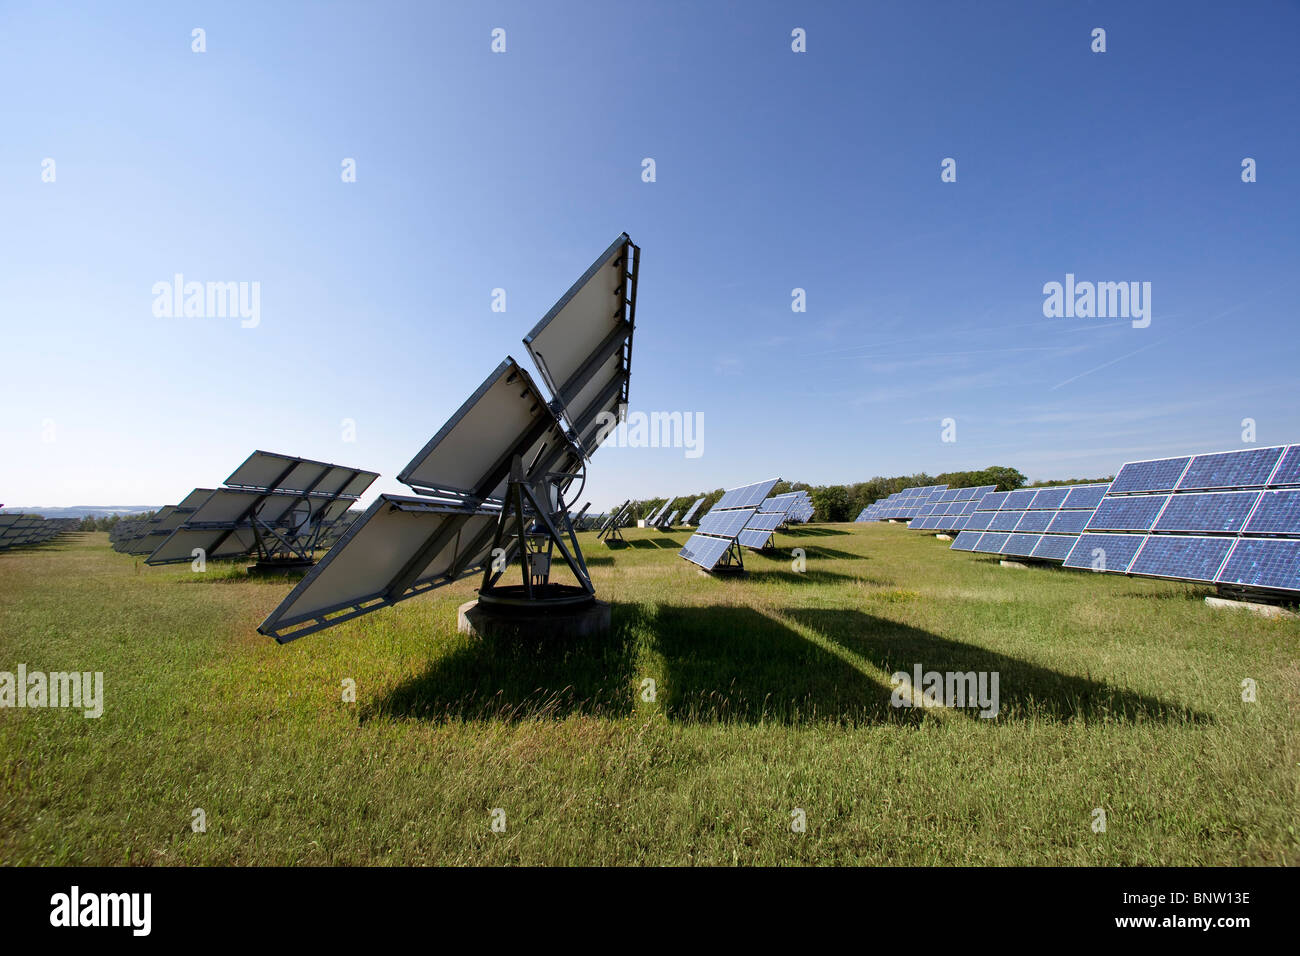 Solar panels mounted on so called movers which automatically direct the panels towards the sunshine, Germany Stock Photo